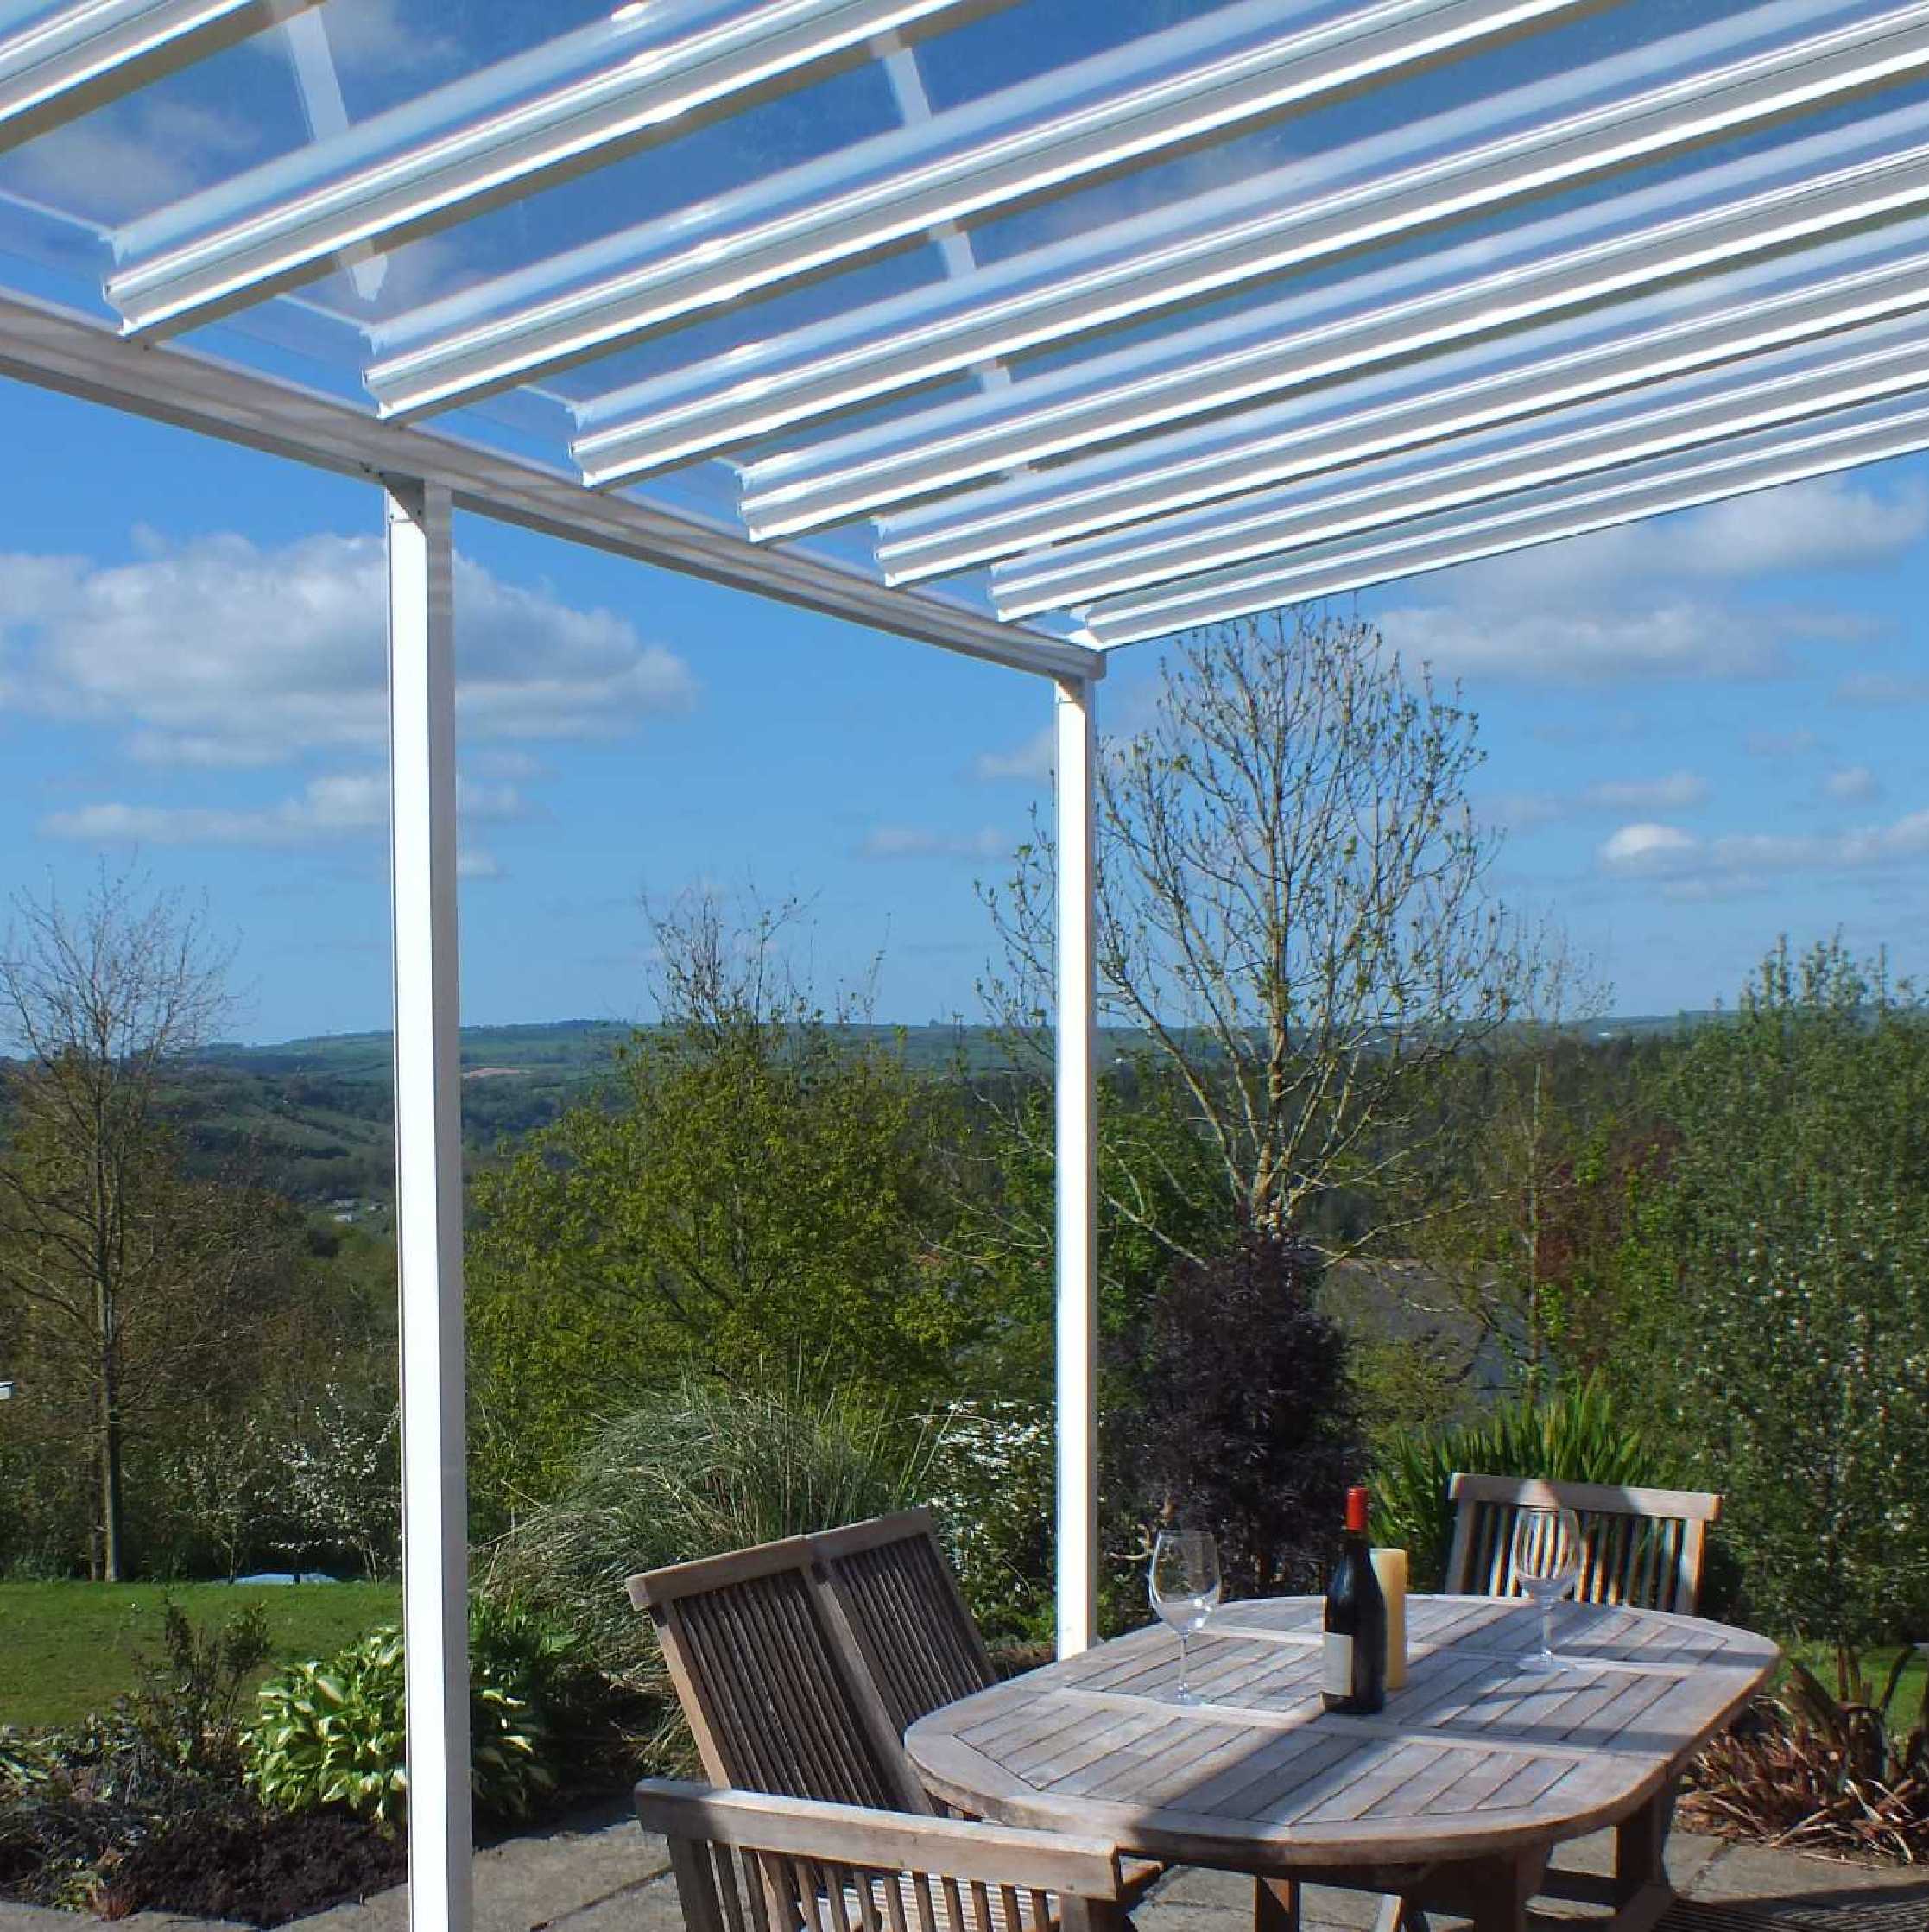 Buy Omega Smart Lean-To Canopy, White with 6mm Glass Clear Plate Polycarbonate Glazing - 10.5m (W) x 3.0m (P), (5) Supporting Posts online today